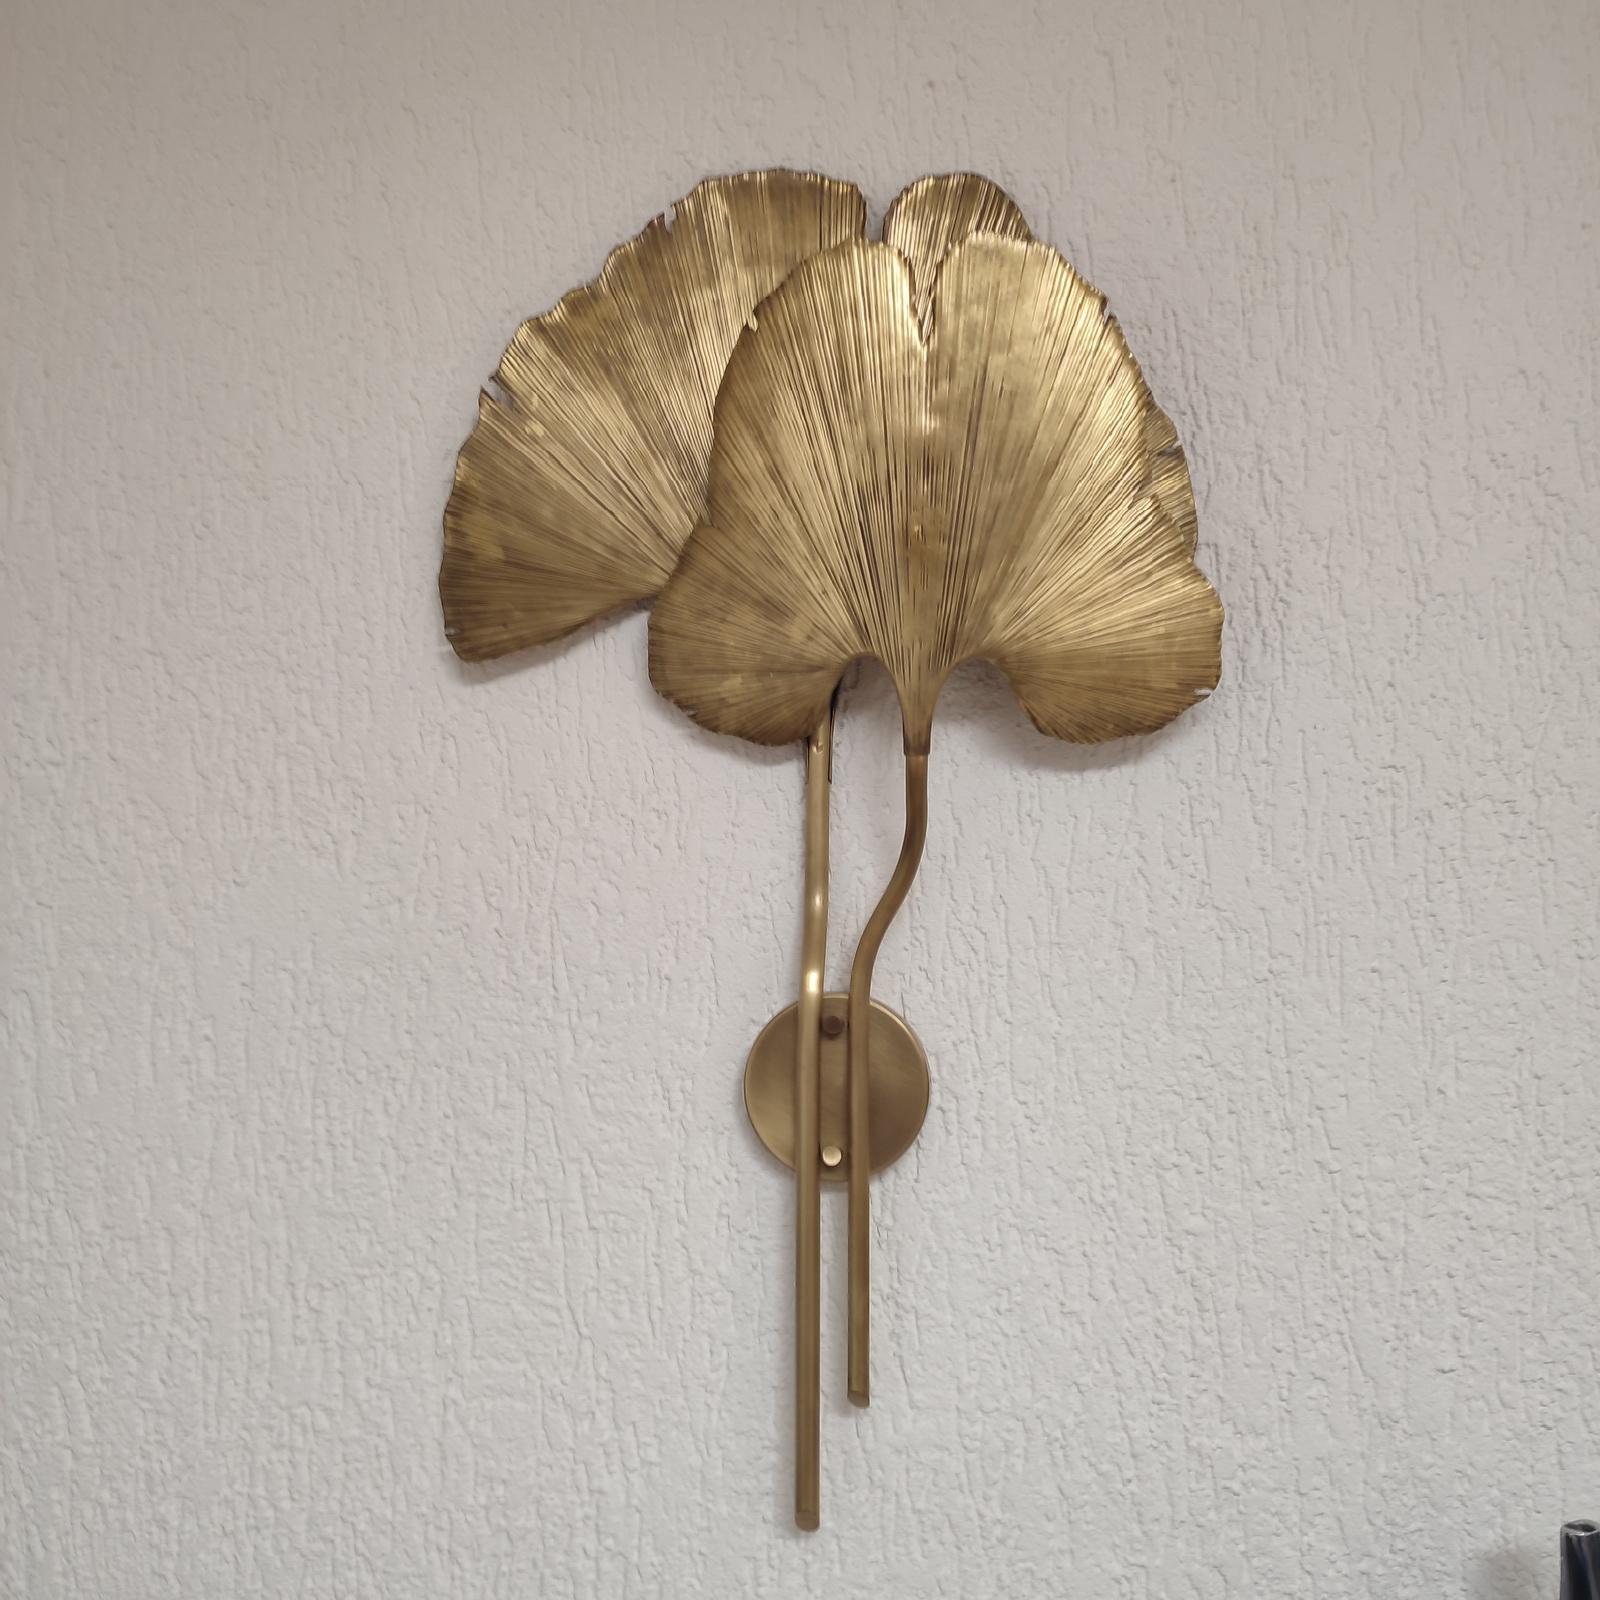 Amazing wall light made of two overlapping brass leaves of ginkgo. Organic shape, this wall light could make an eye catcher of your interior. Entirely hand made, this piece has been created and built to look as much as possible to the natural leaf.